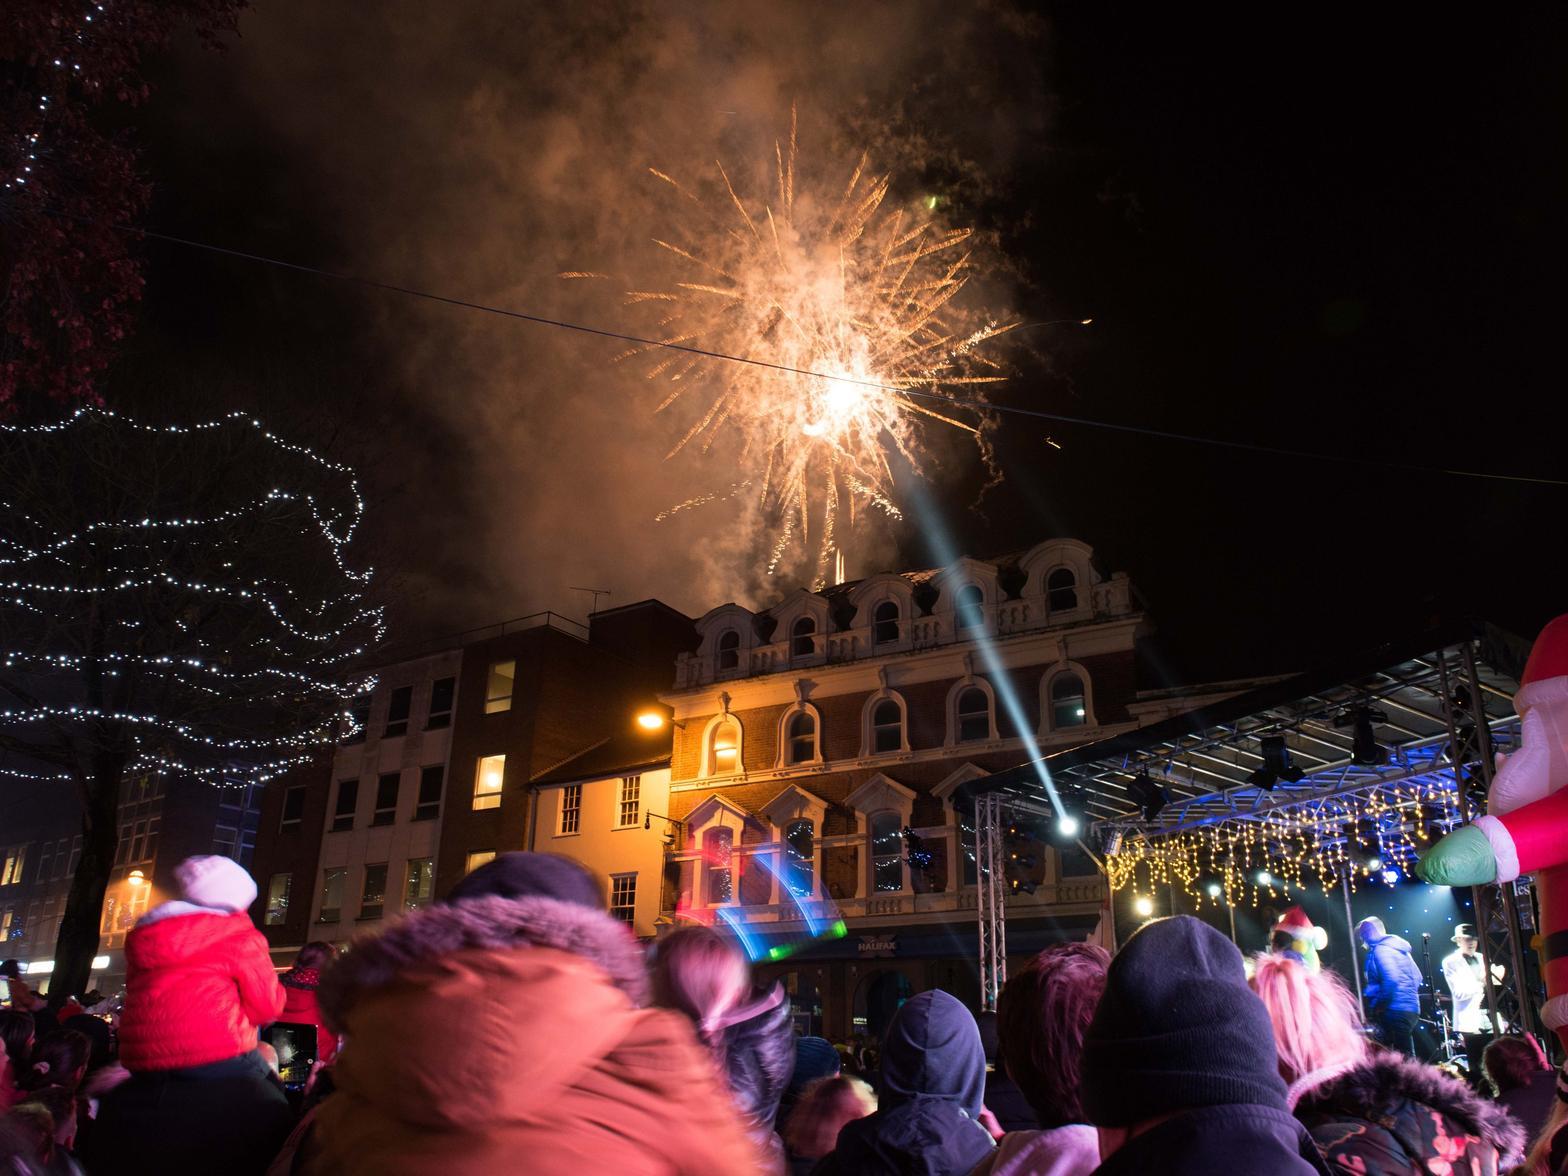 Firework fun! Pick up next week's Bucks Herald for more pictures from this event